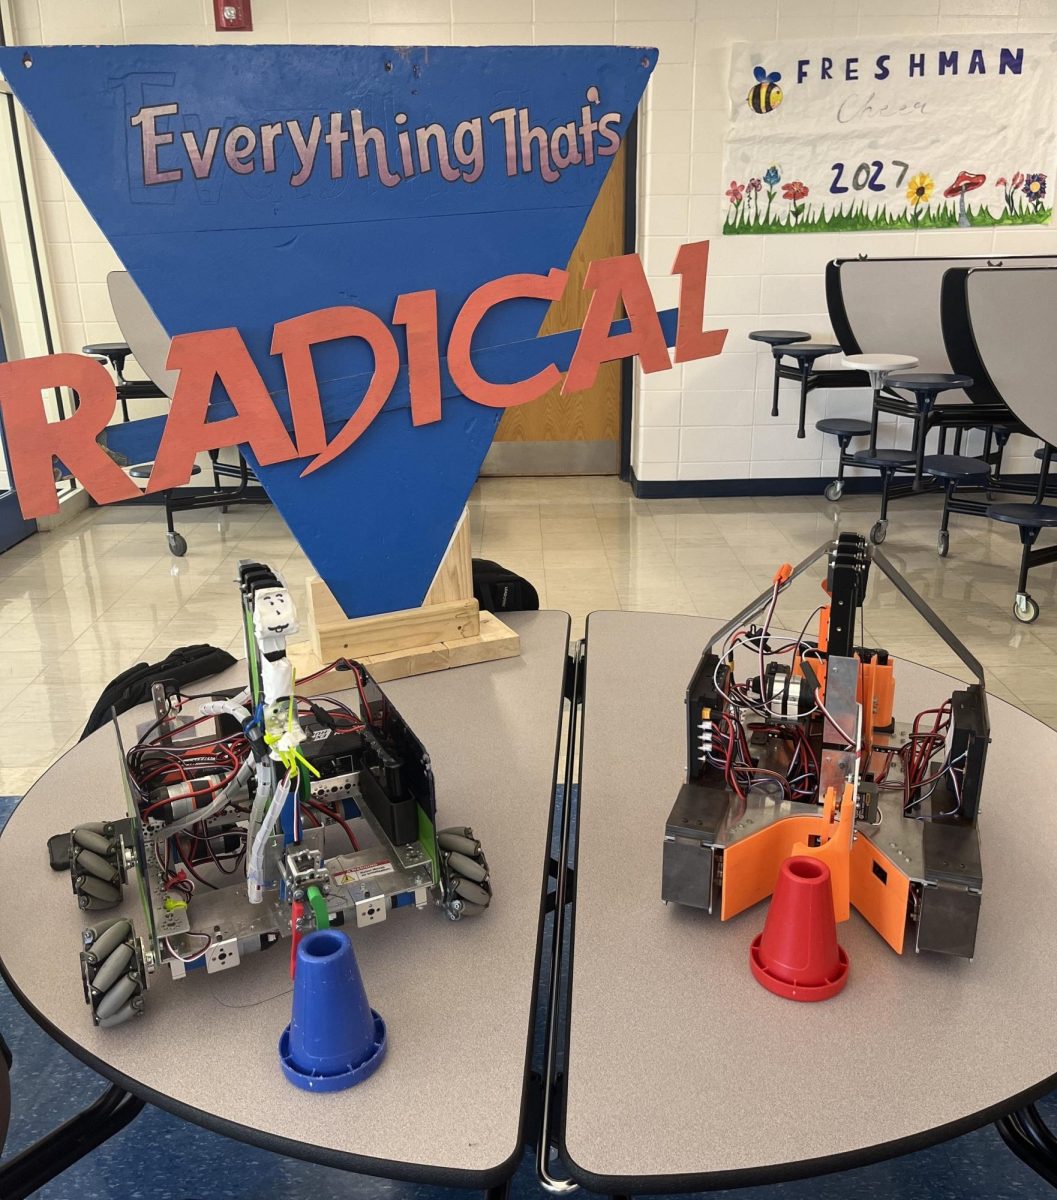 The Everything Thats Radical and Deviation From The Norm teams showed their robots to potential future team members.